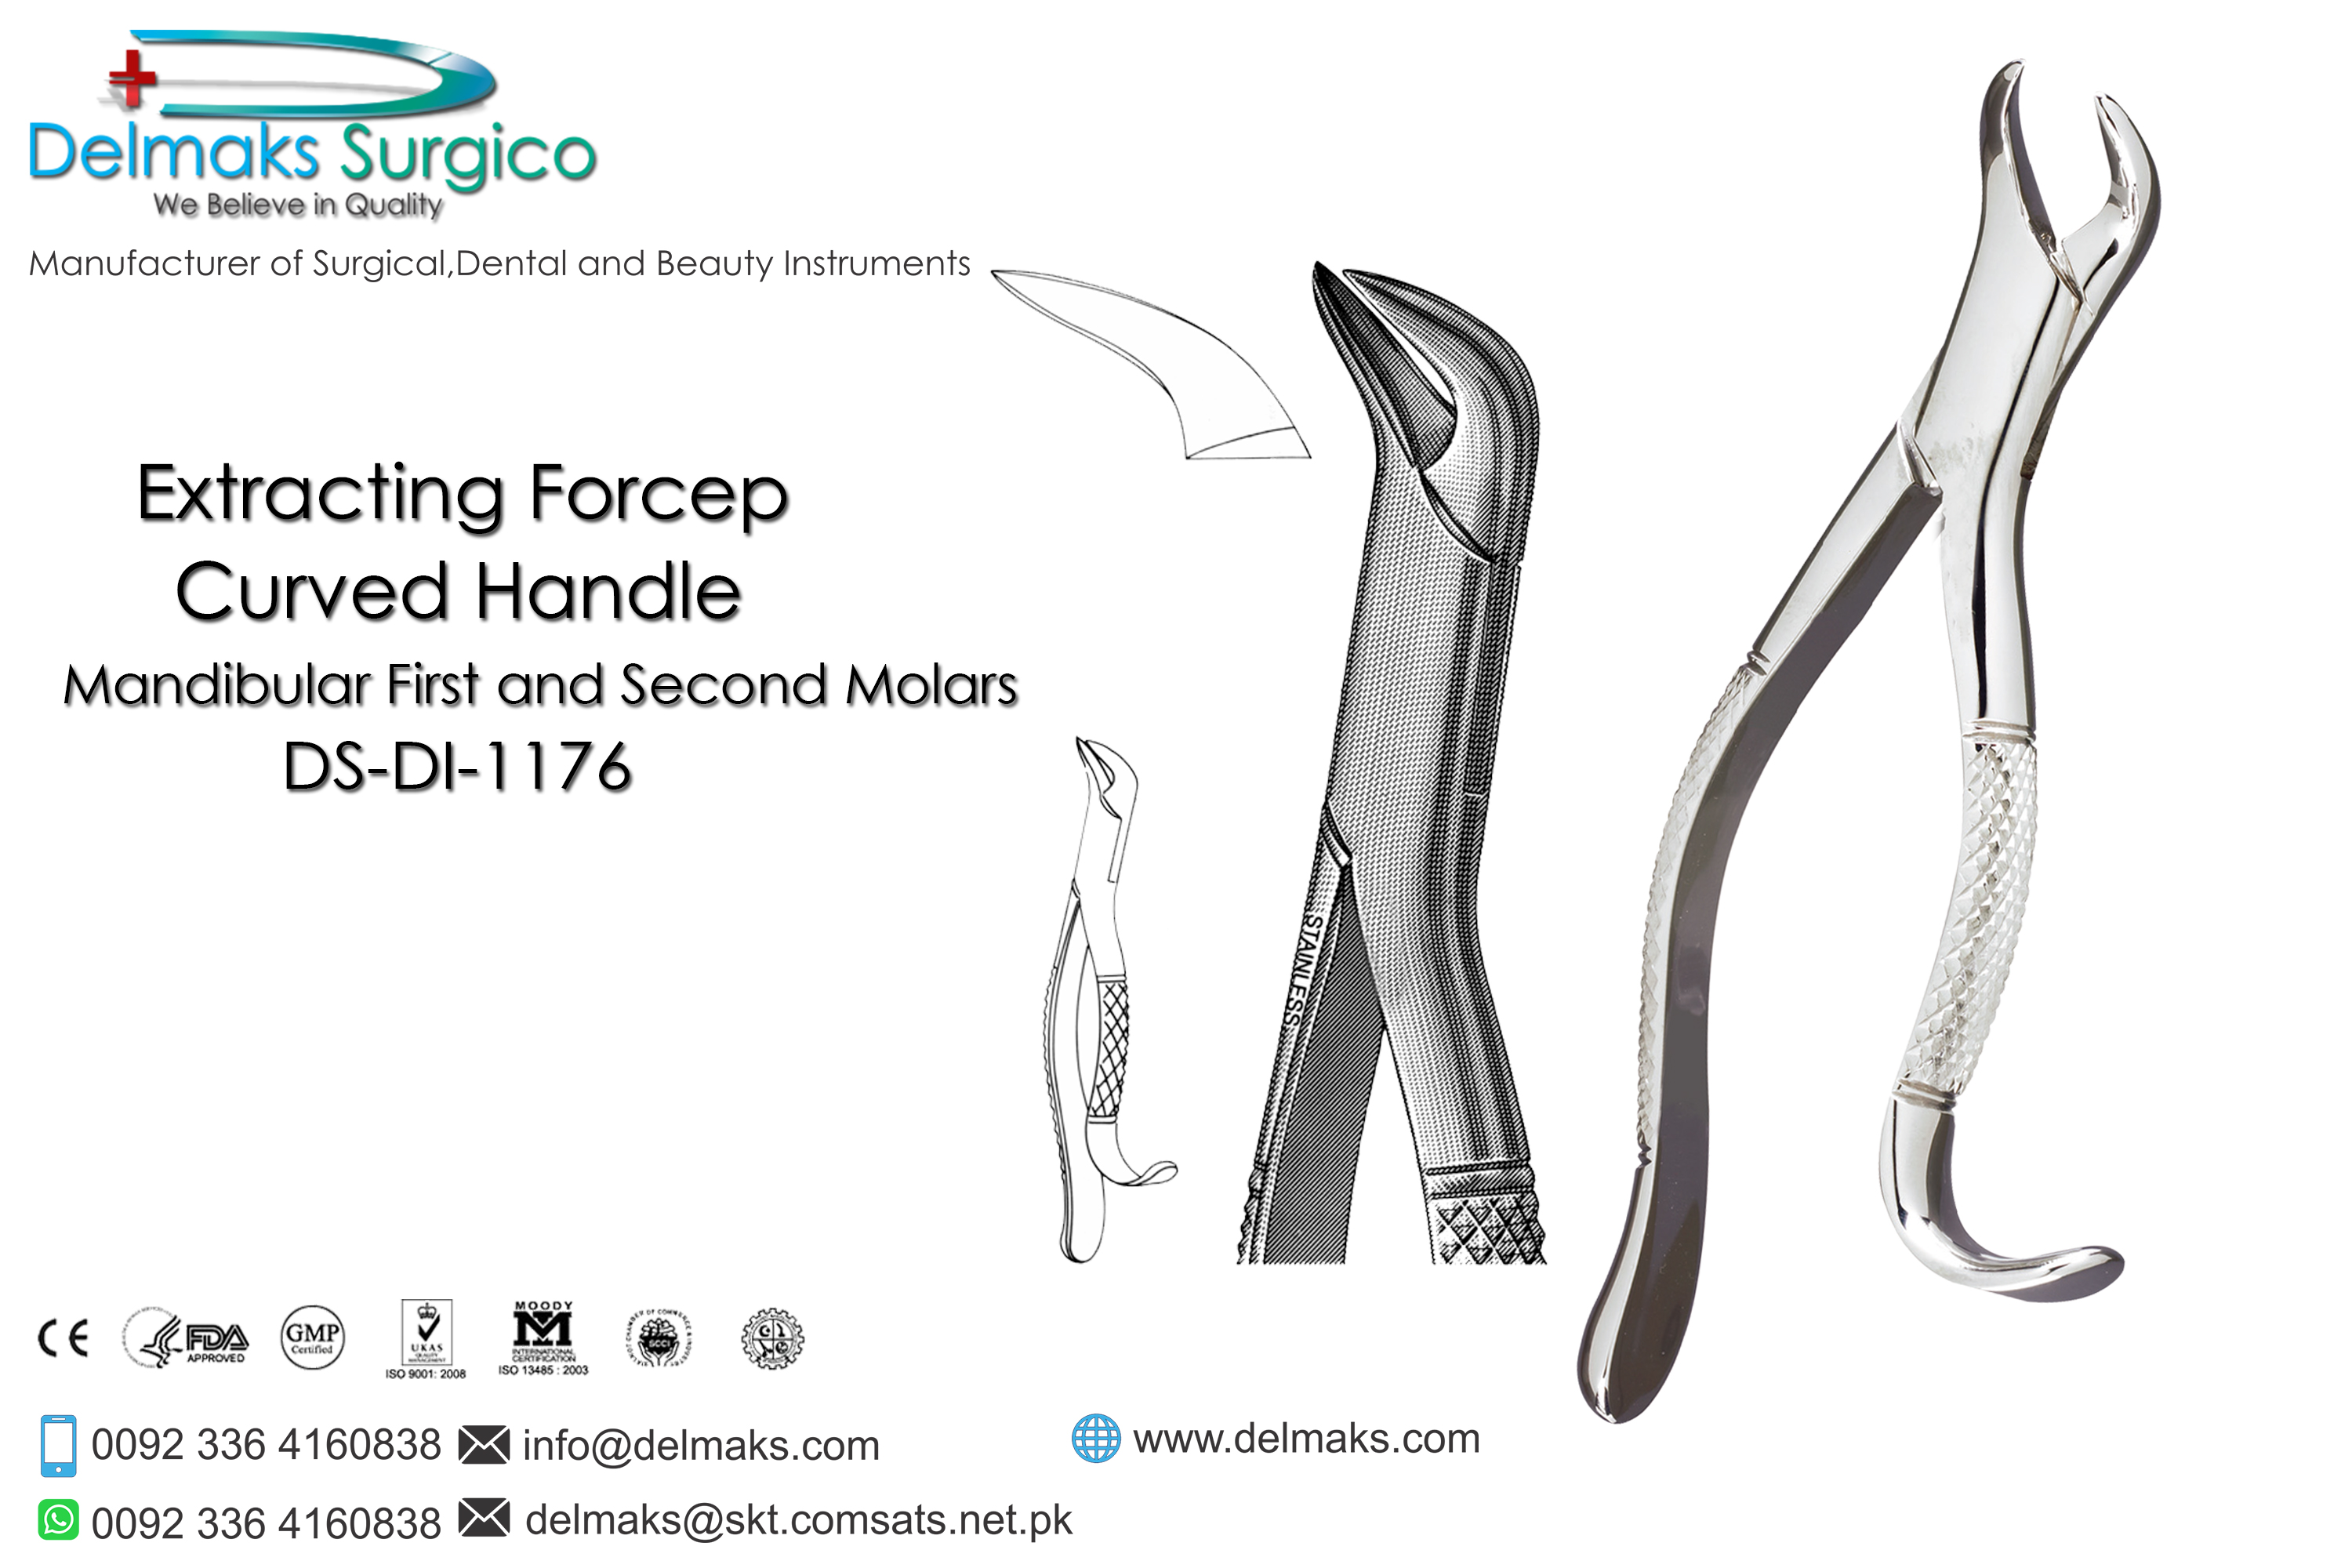 Extracting Forceps (Curved Handle Mandibular First And Second Molars)-Oral and Maxillofacial Surgery Instruments-Dental Instruments-Delmaks Surgico 